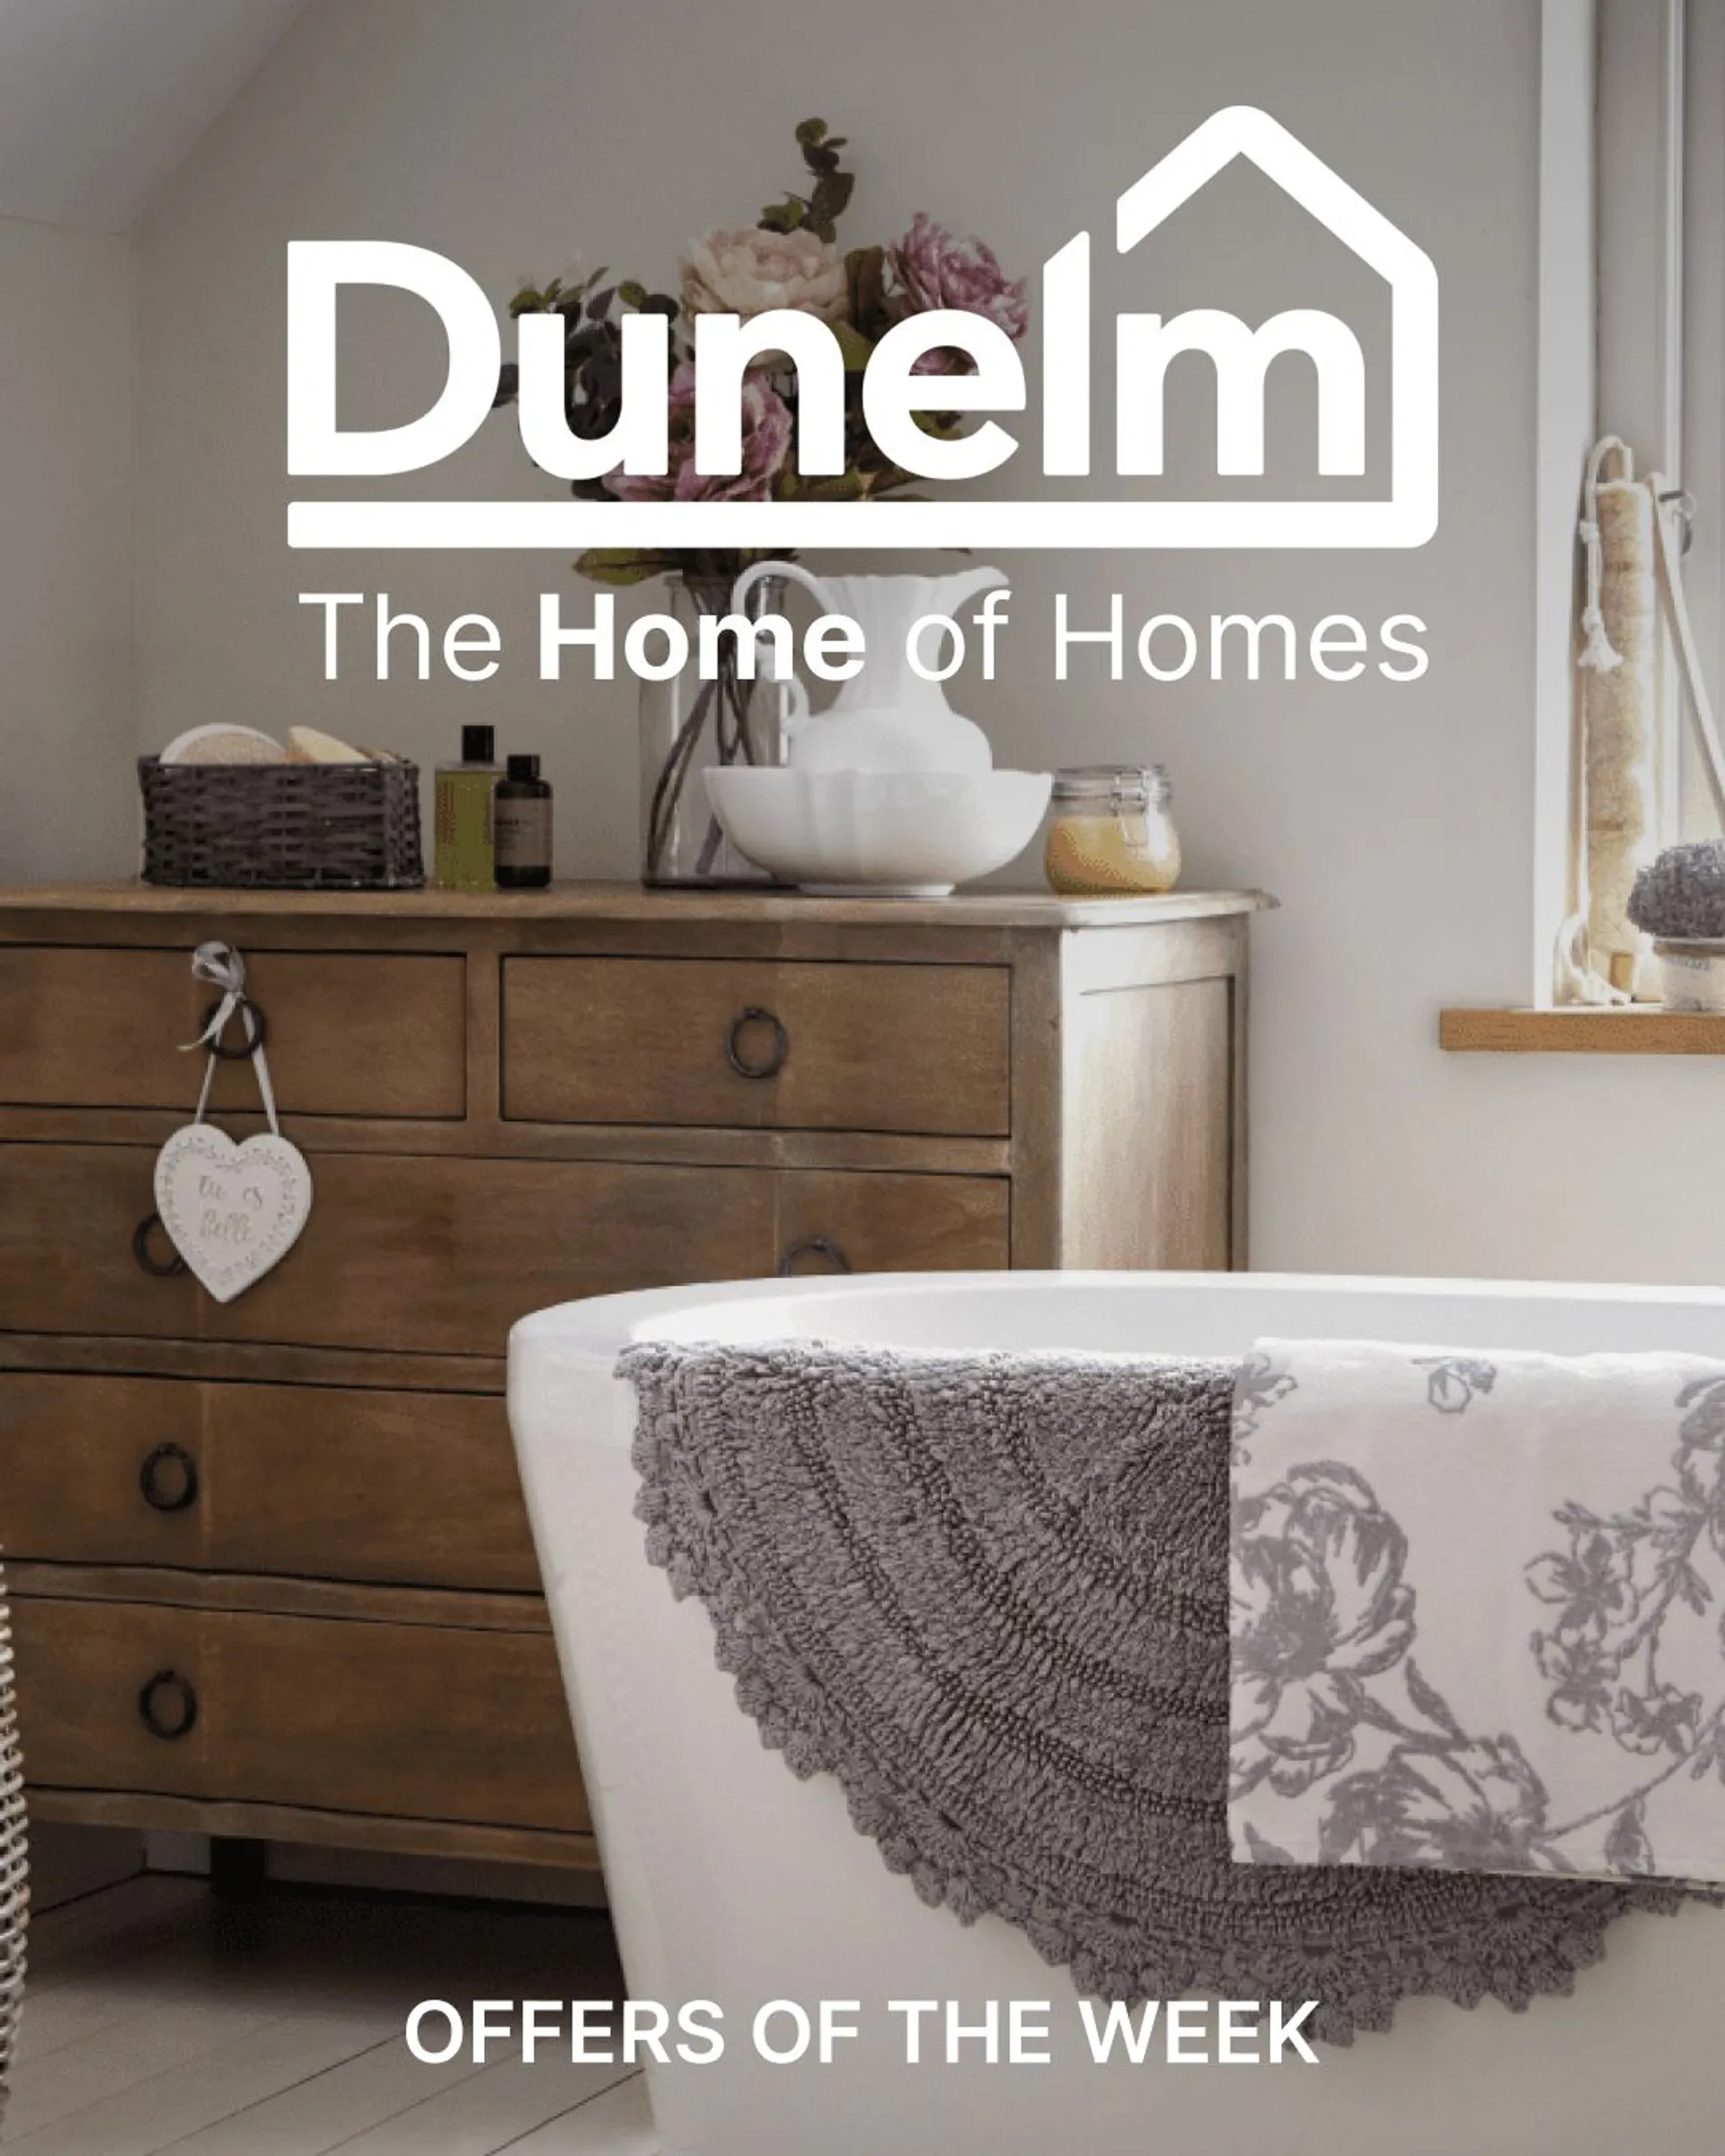 Dunelm - Home and Furniture